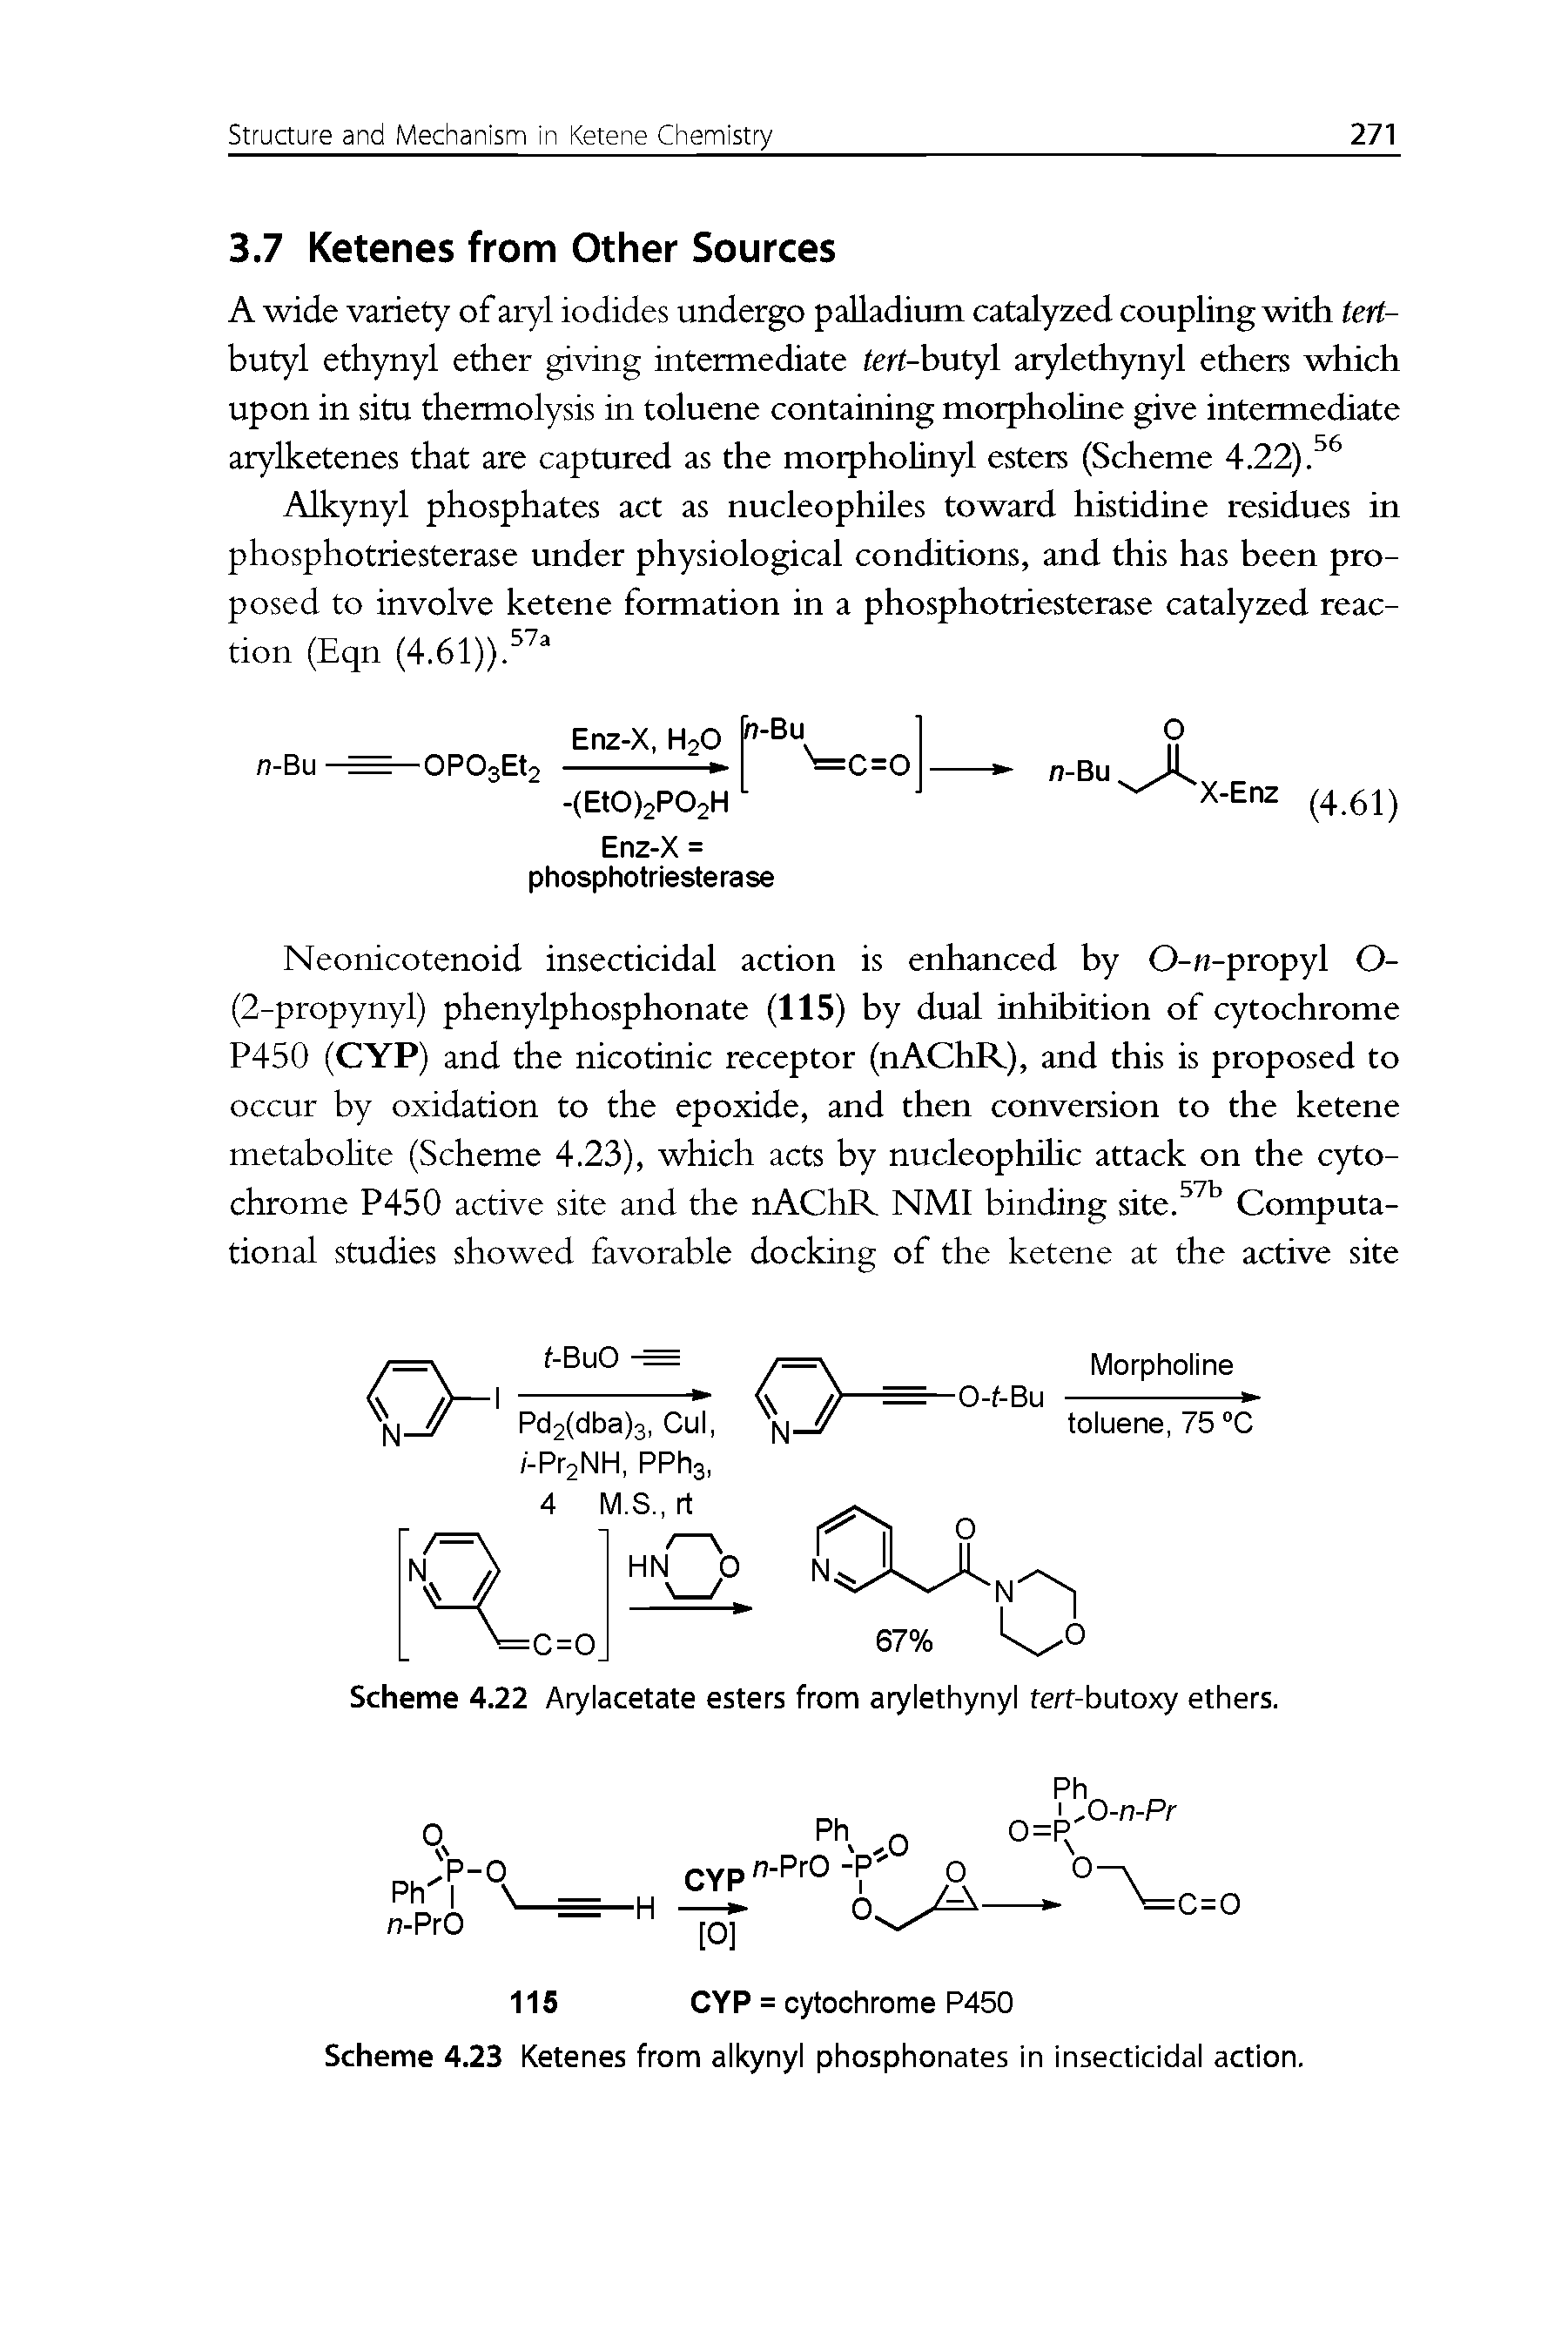 Scheme 4.23 Ketenes from alkynyl phosphonates in insecticidal action.